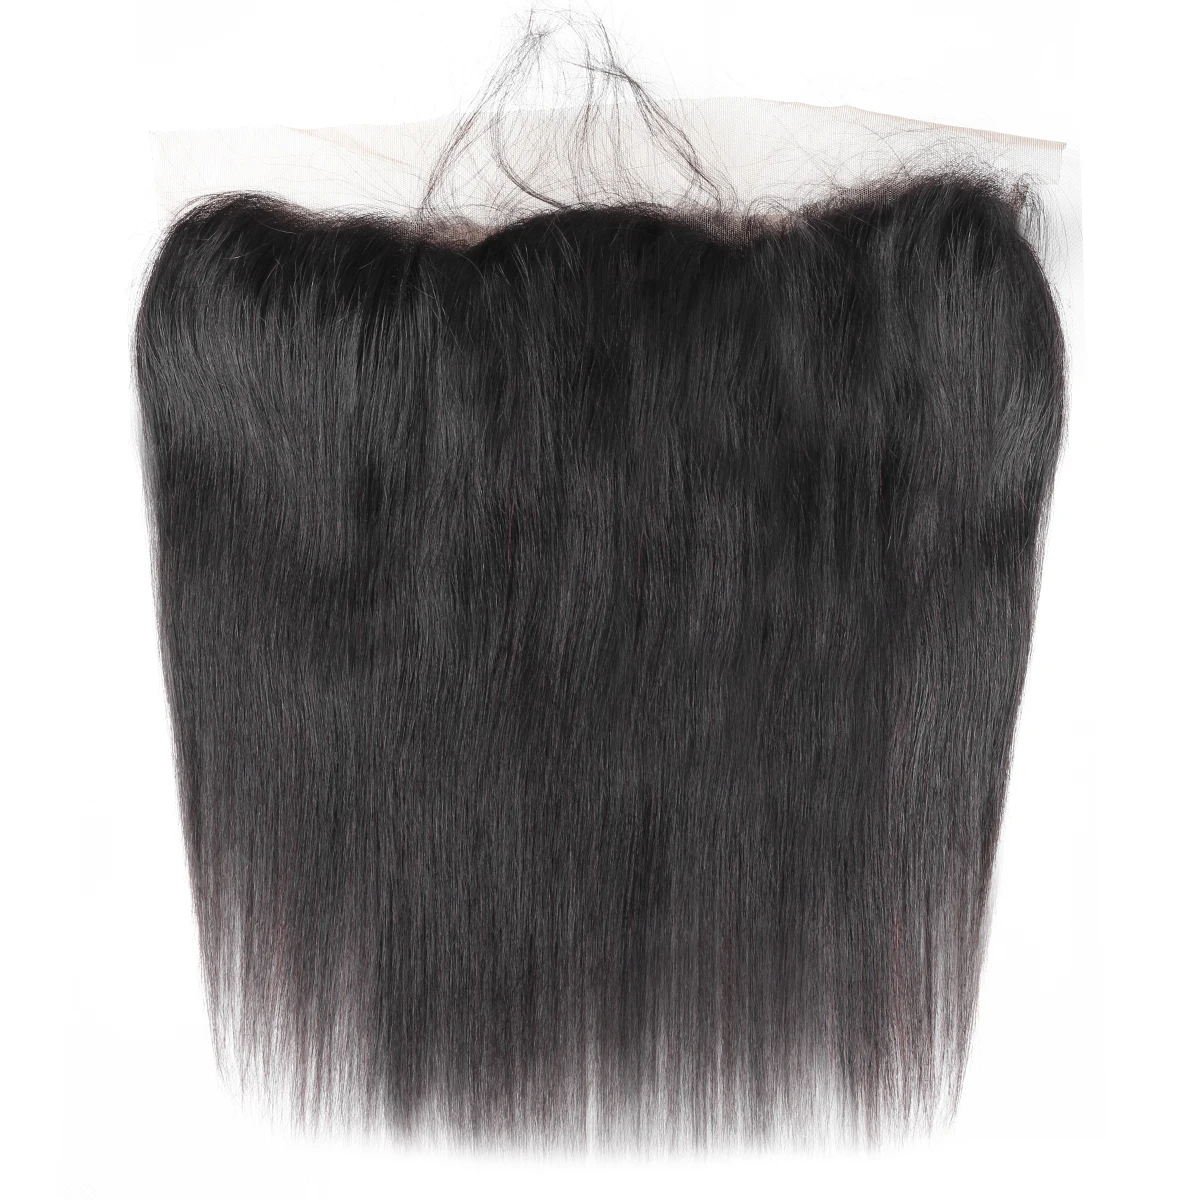 

Vast hd lace 13x4 lace frontals silk straight raw virgin brazilian human hair bundles with lace frontals, Natural color,1b#,1#(can be dyed any color)